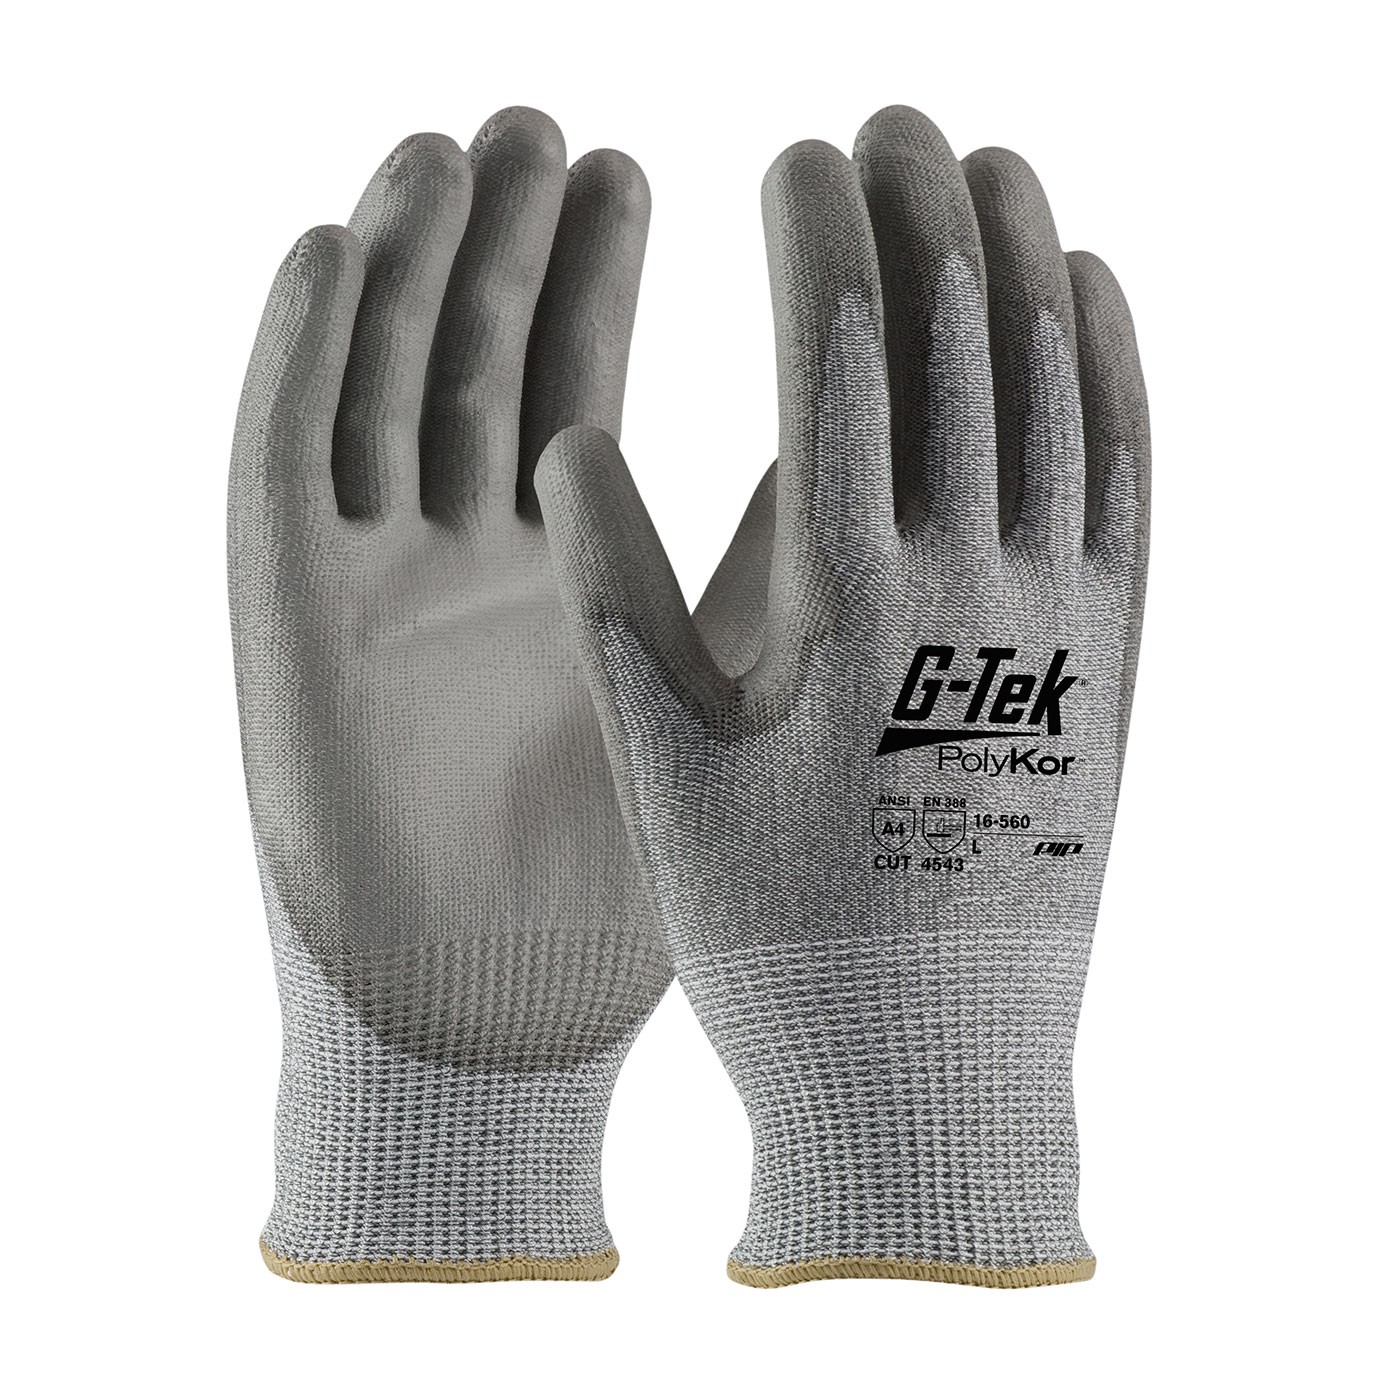 G-Tek® PolyKor® Seamless Knit PolyKor® Blended Glove with Polyurethane Coated Smooth Grip on Palm & Fingers  (#16-560)